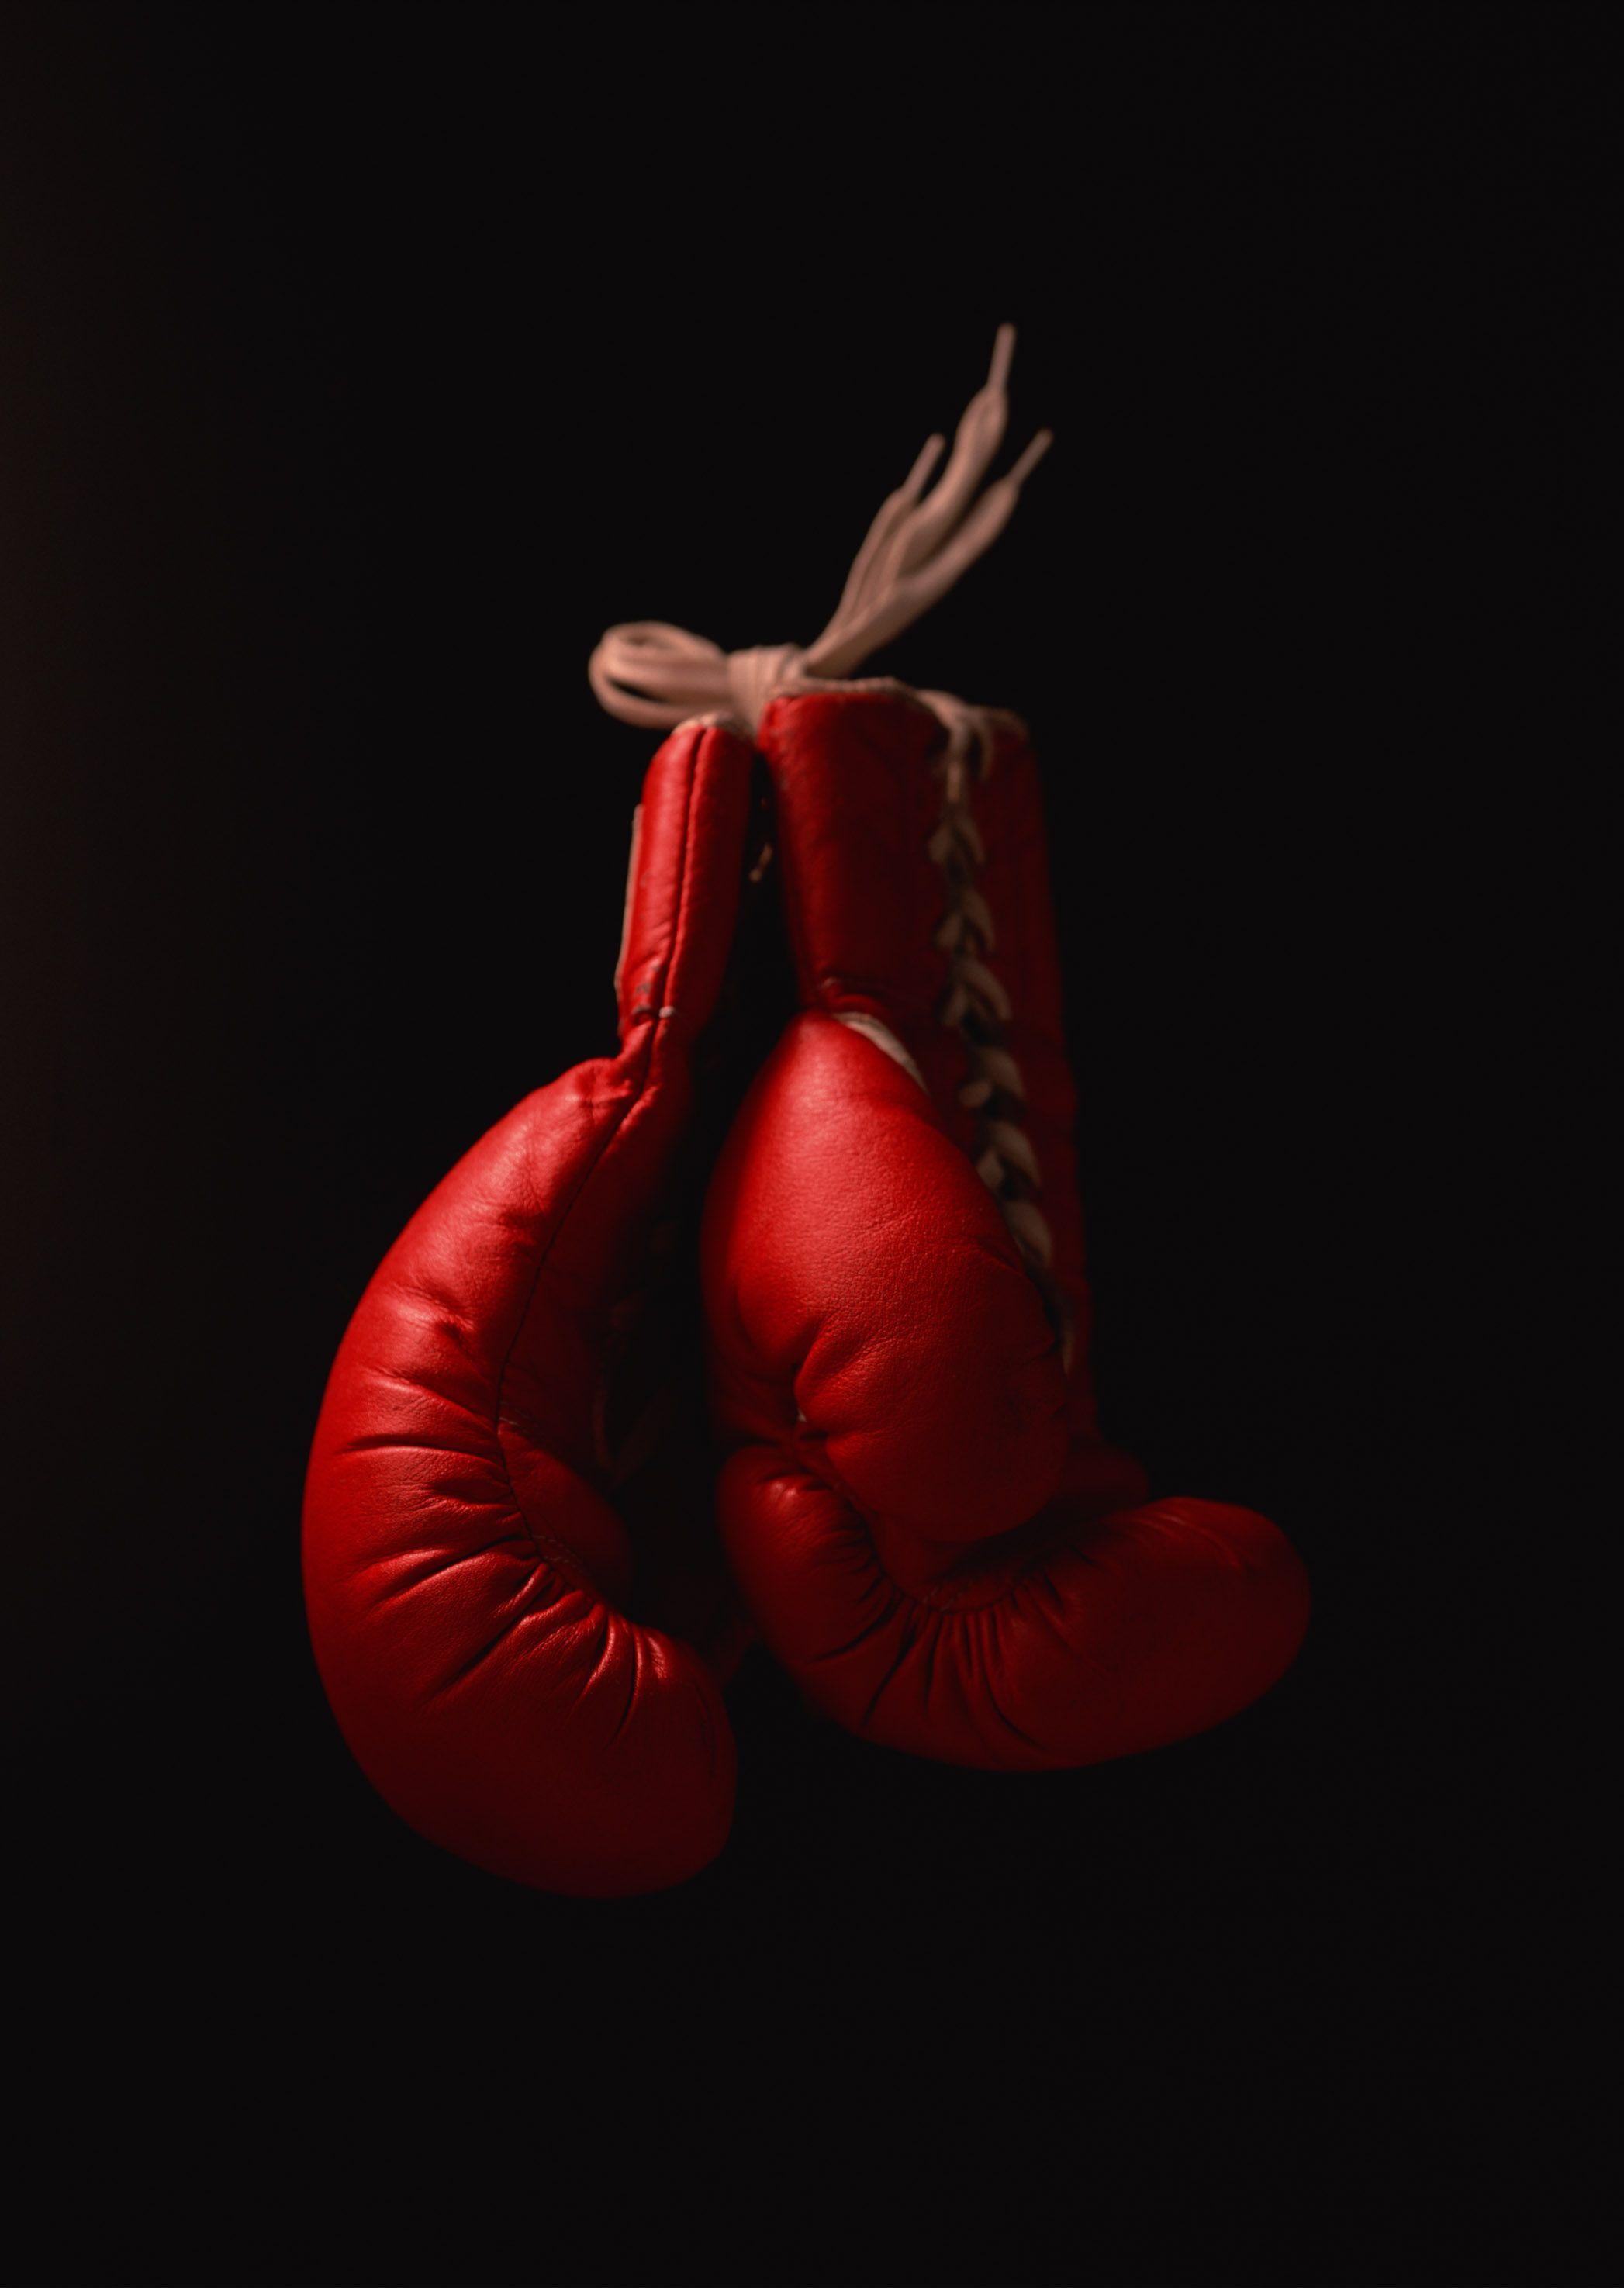 Hanging boxing gloves wallpaper Gallery